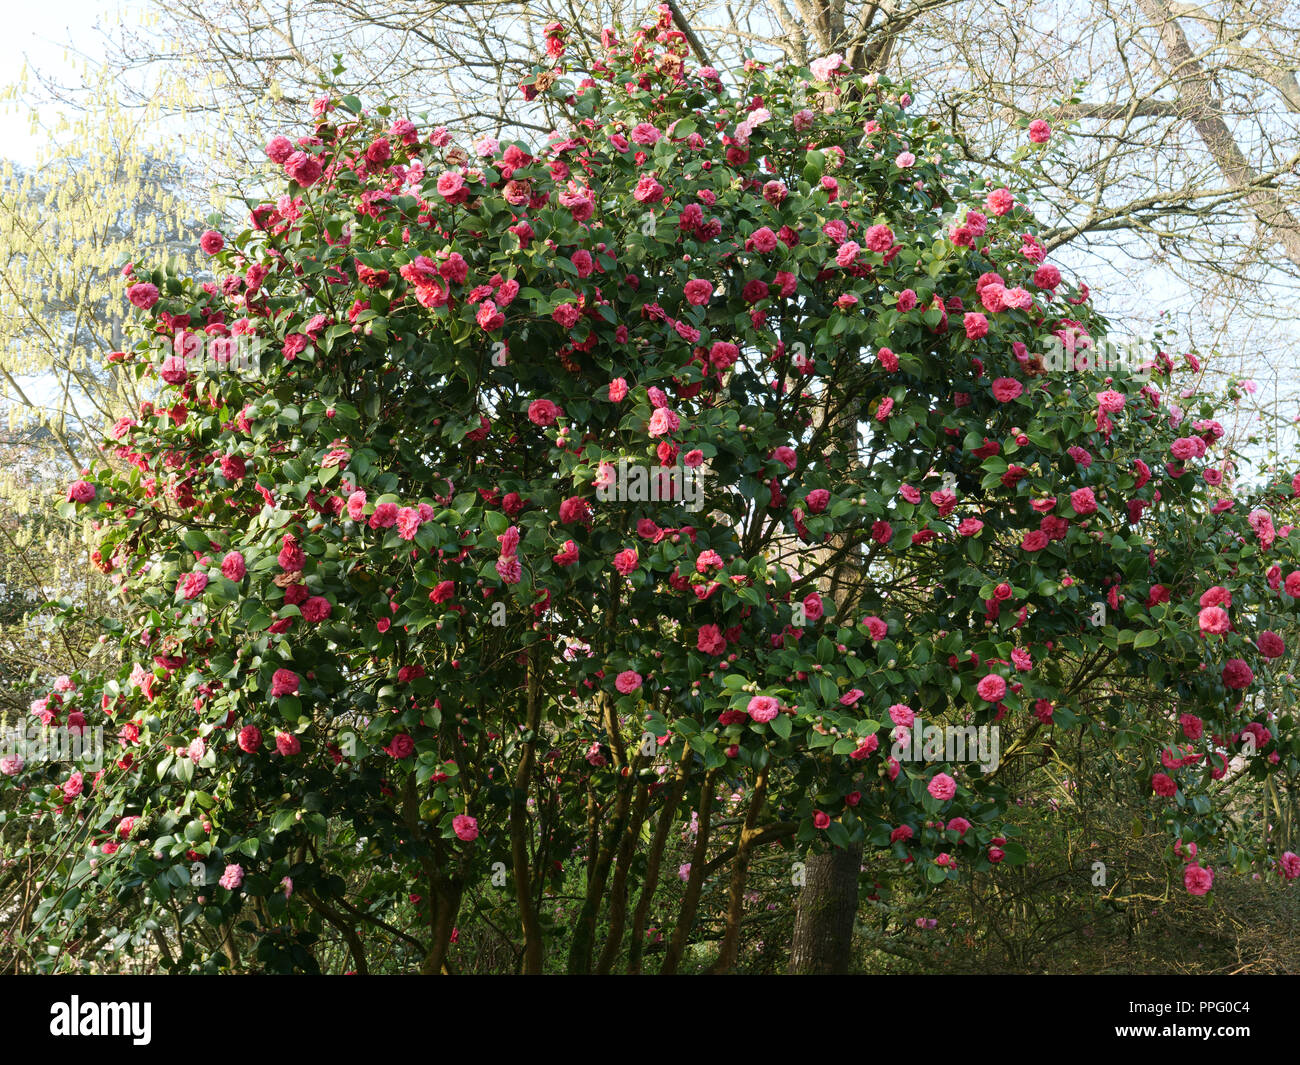 Early spring in the garden. The pink striped flowers of Camellia Comte de Gomer flowering in early spring on this large grown evergreen glossy shrub. Stock Photo